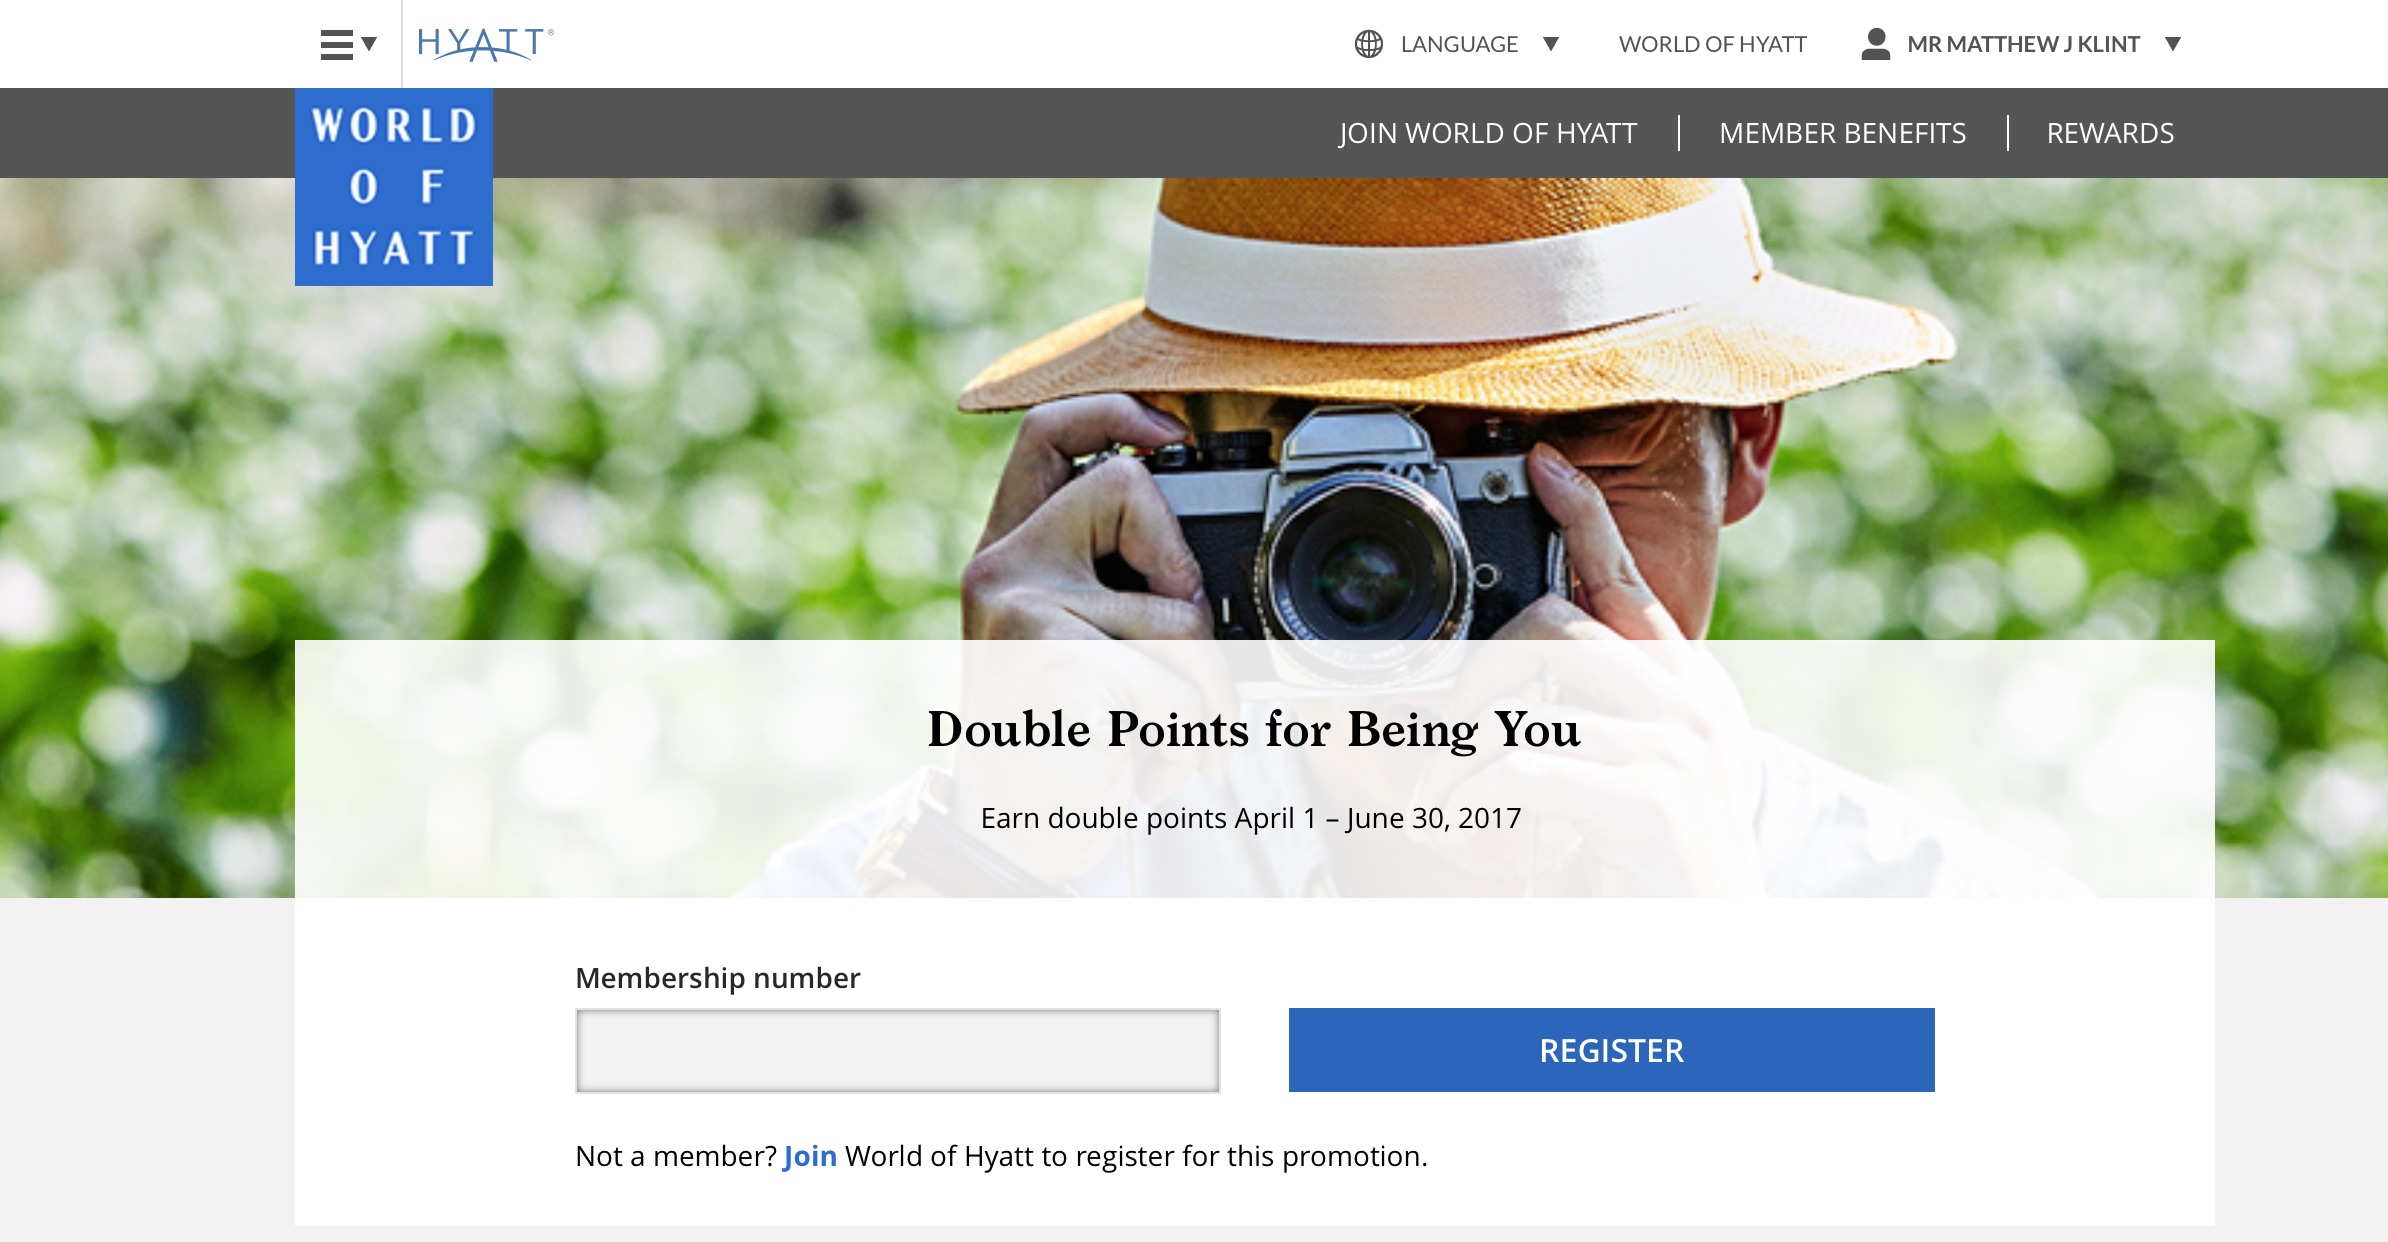 New World of Hyatt Promotion Worthwhile? Live and Let's Fly